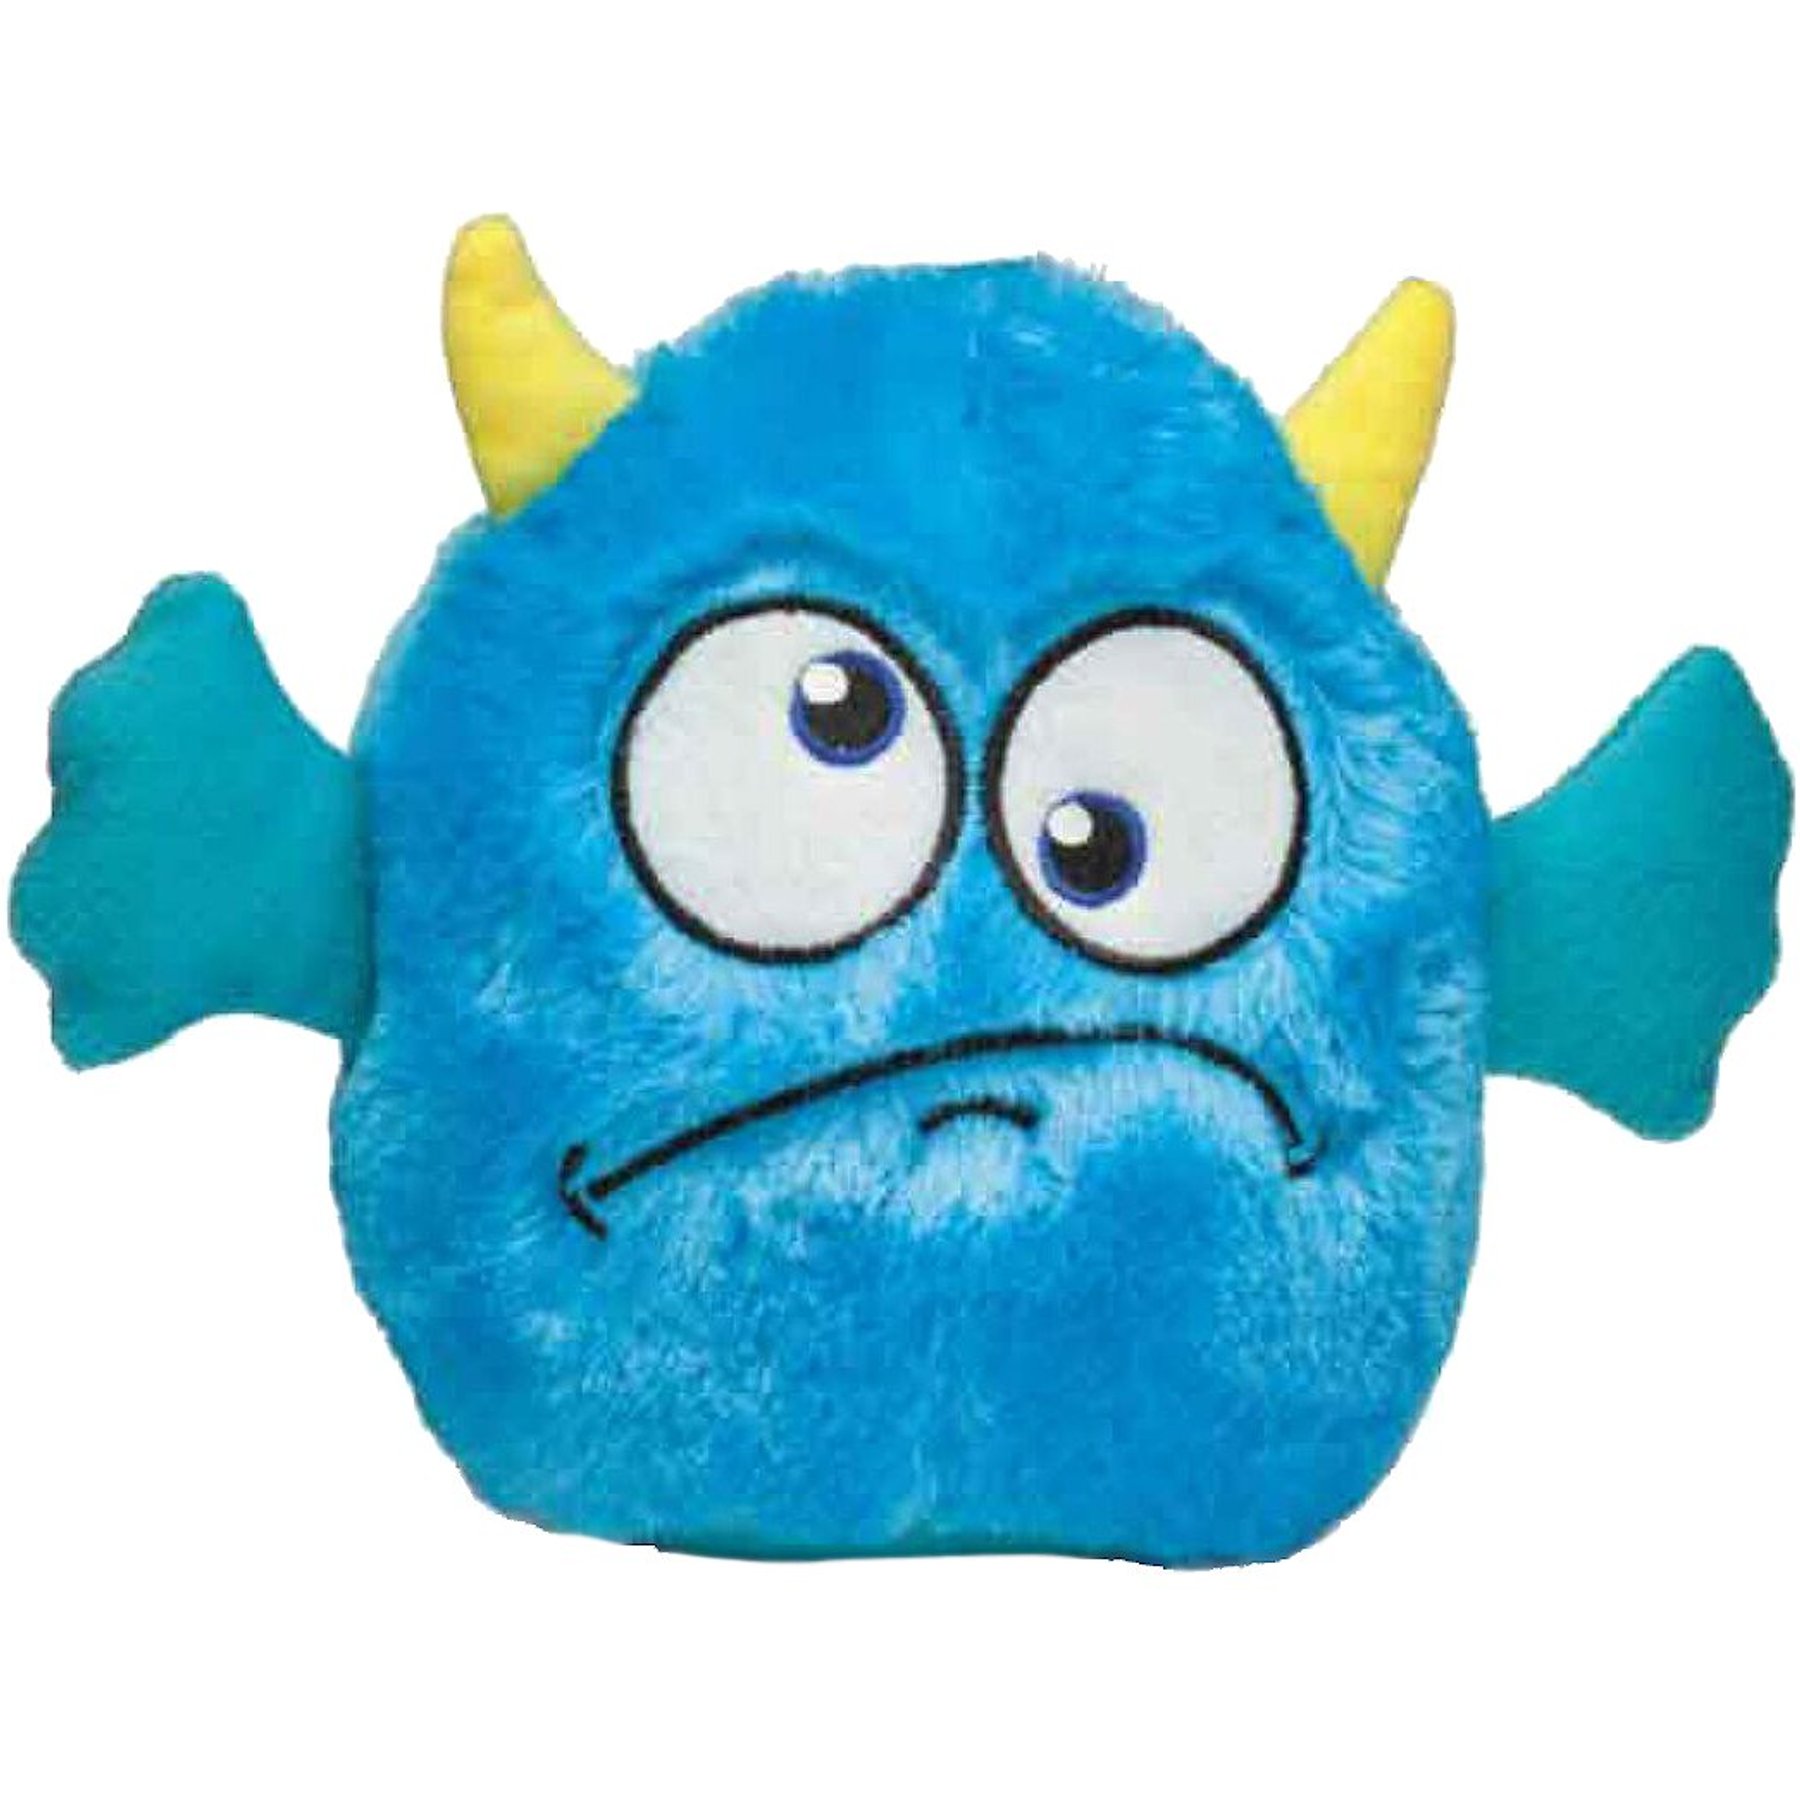 MTERSN Cute Squeaky Dog Toys : Blue Game Controller Plush Dog Toy